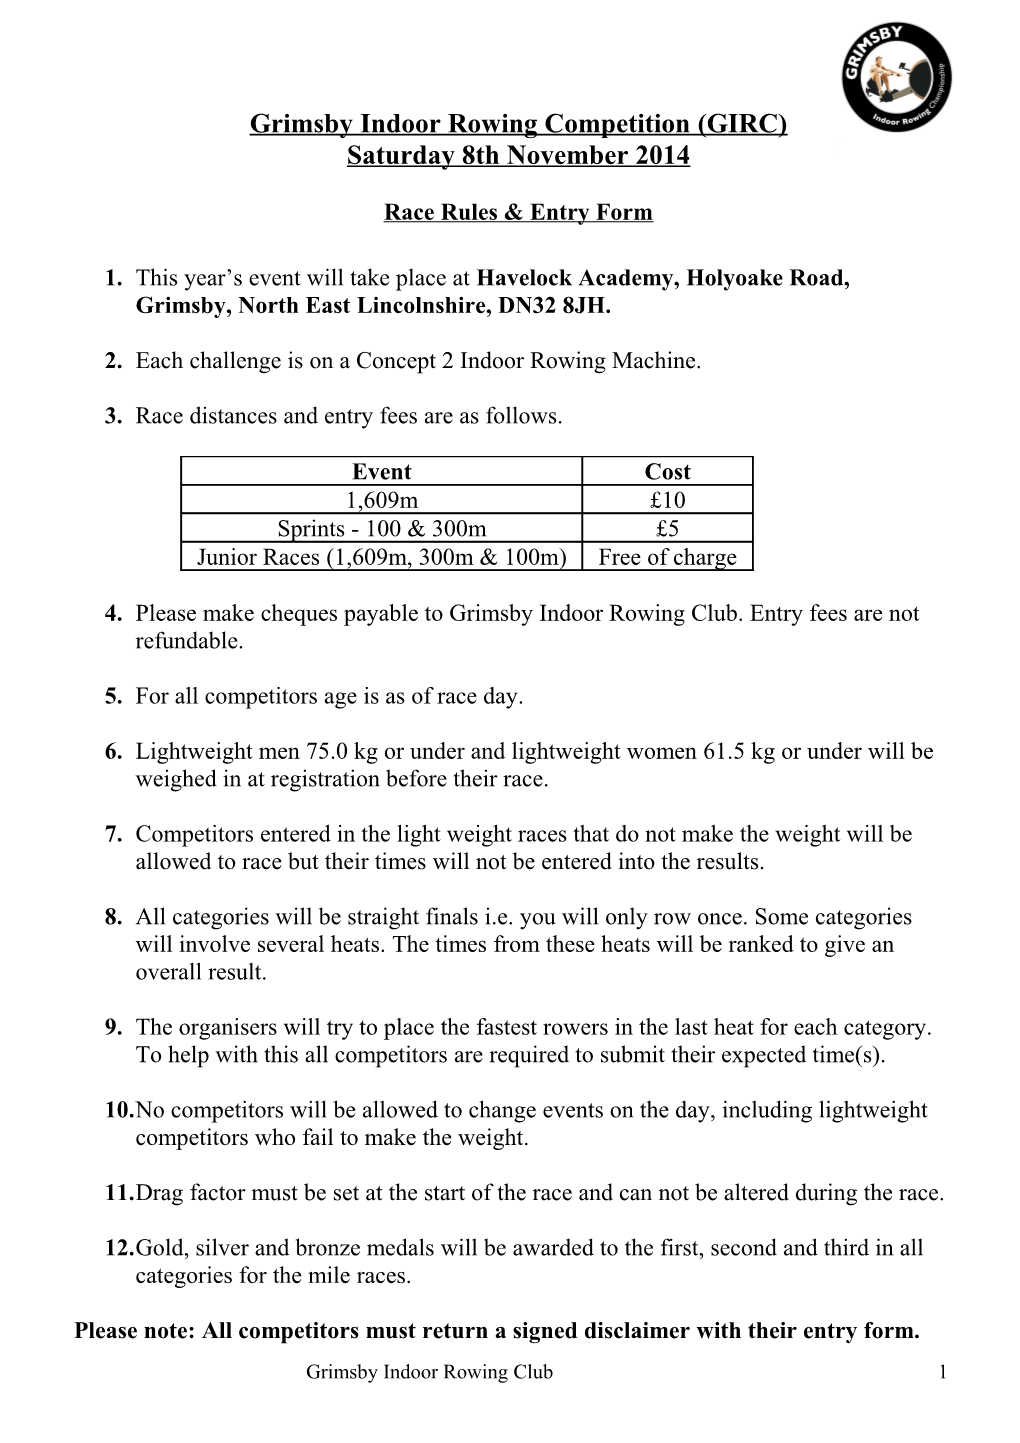 Team Race Rules and Entry Form